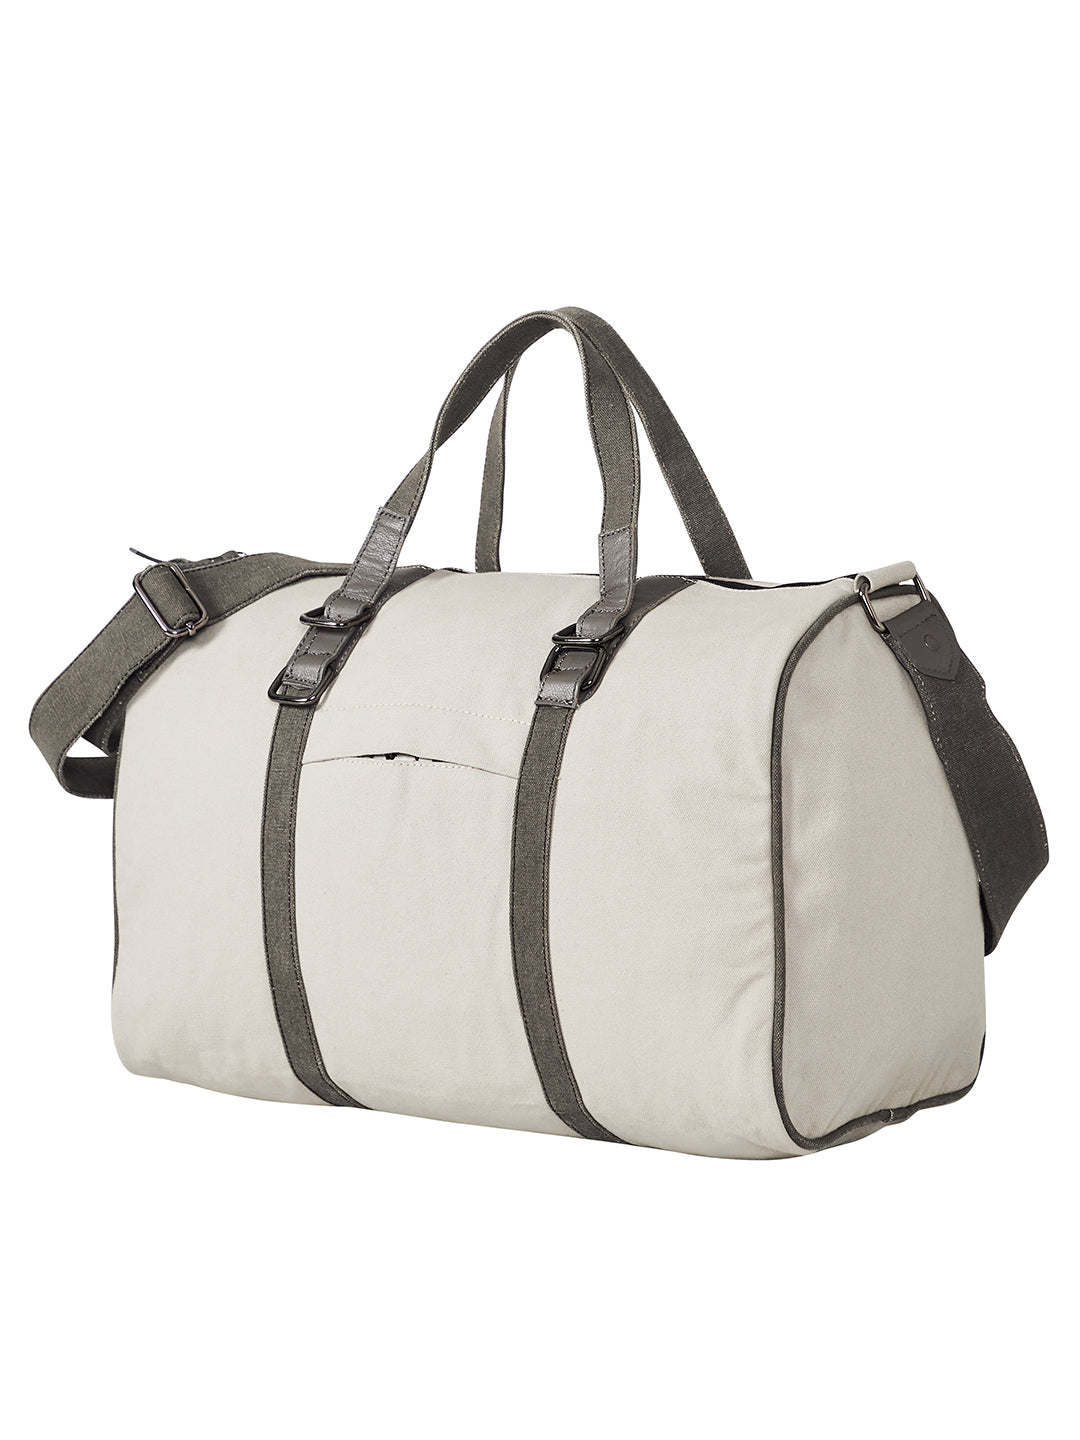 Mona B - Ice Grey 100% Cotton Canvas Duffel Gym Travel and Sports Bag with Outside Pocket and Stylish Design for Men and Women